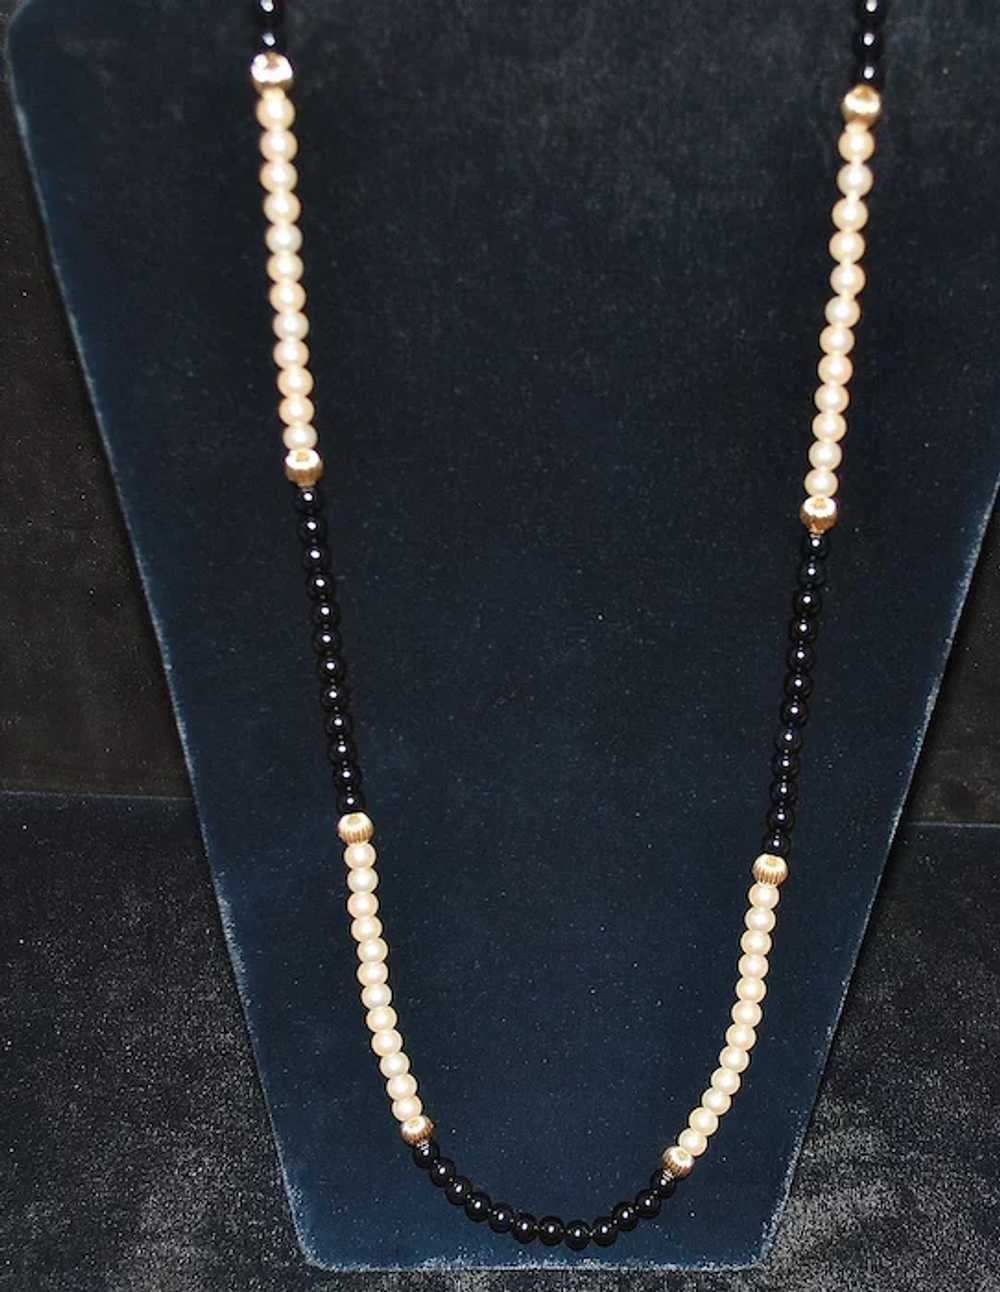 14K Gold, Cultured Pearl and Black Onyx Necklace - image 6